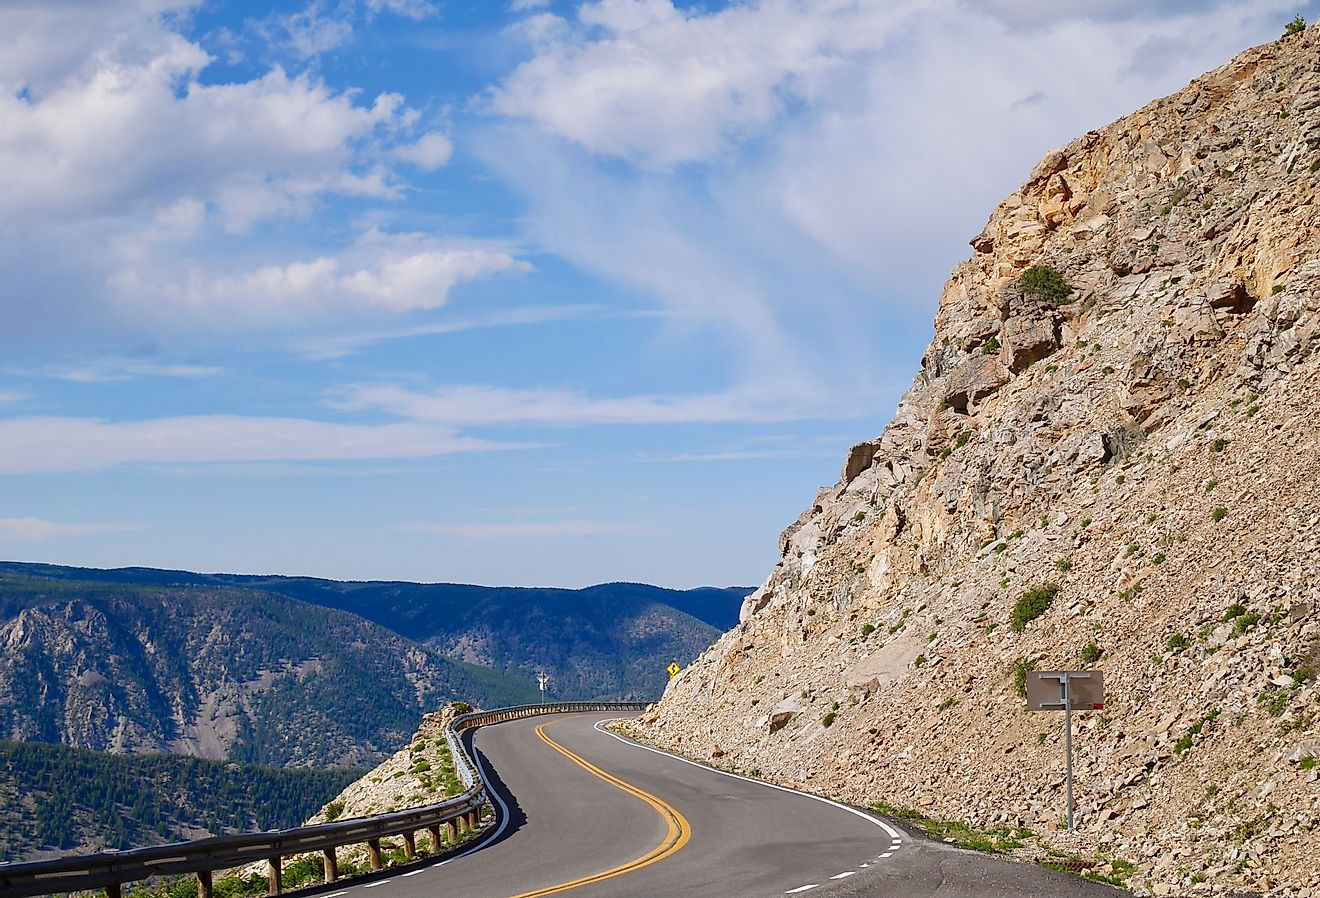 Beartooth Highway, section of U.S route 212 between Montana and Wyoming.